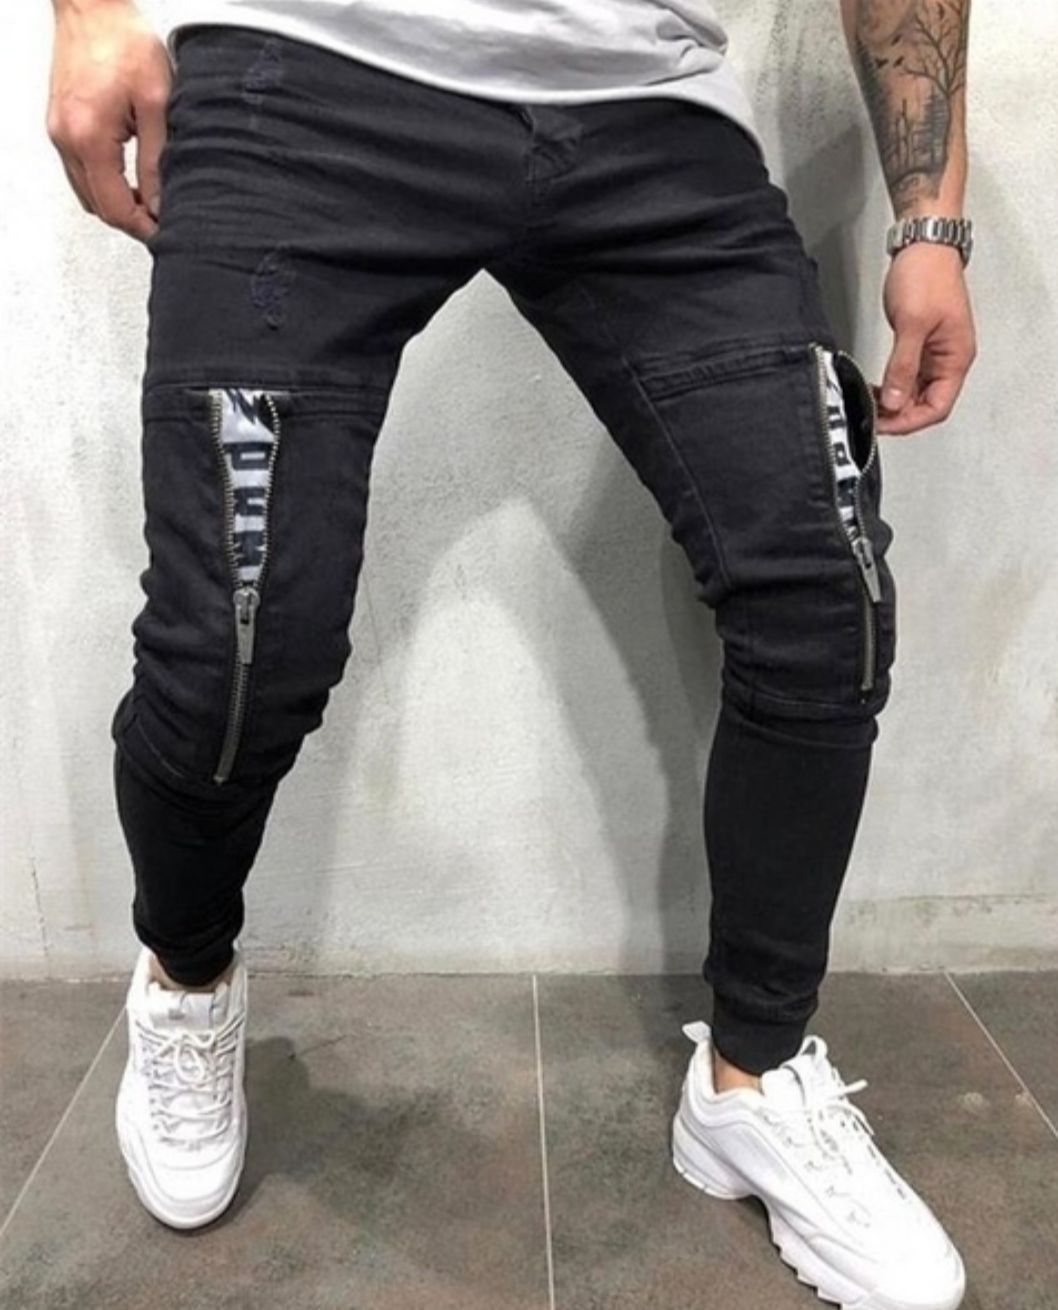 18 Years Factory Loose Denim Jeans - Fashion men’s denim trousers casual sports pants stretch trousers jeans men – Yulin